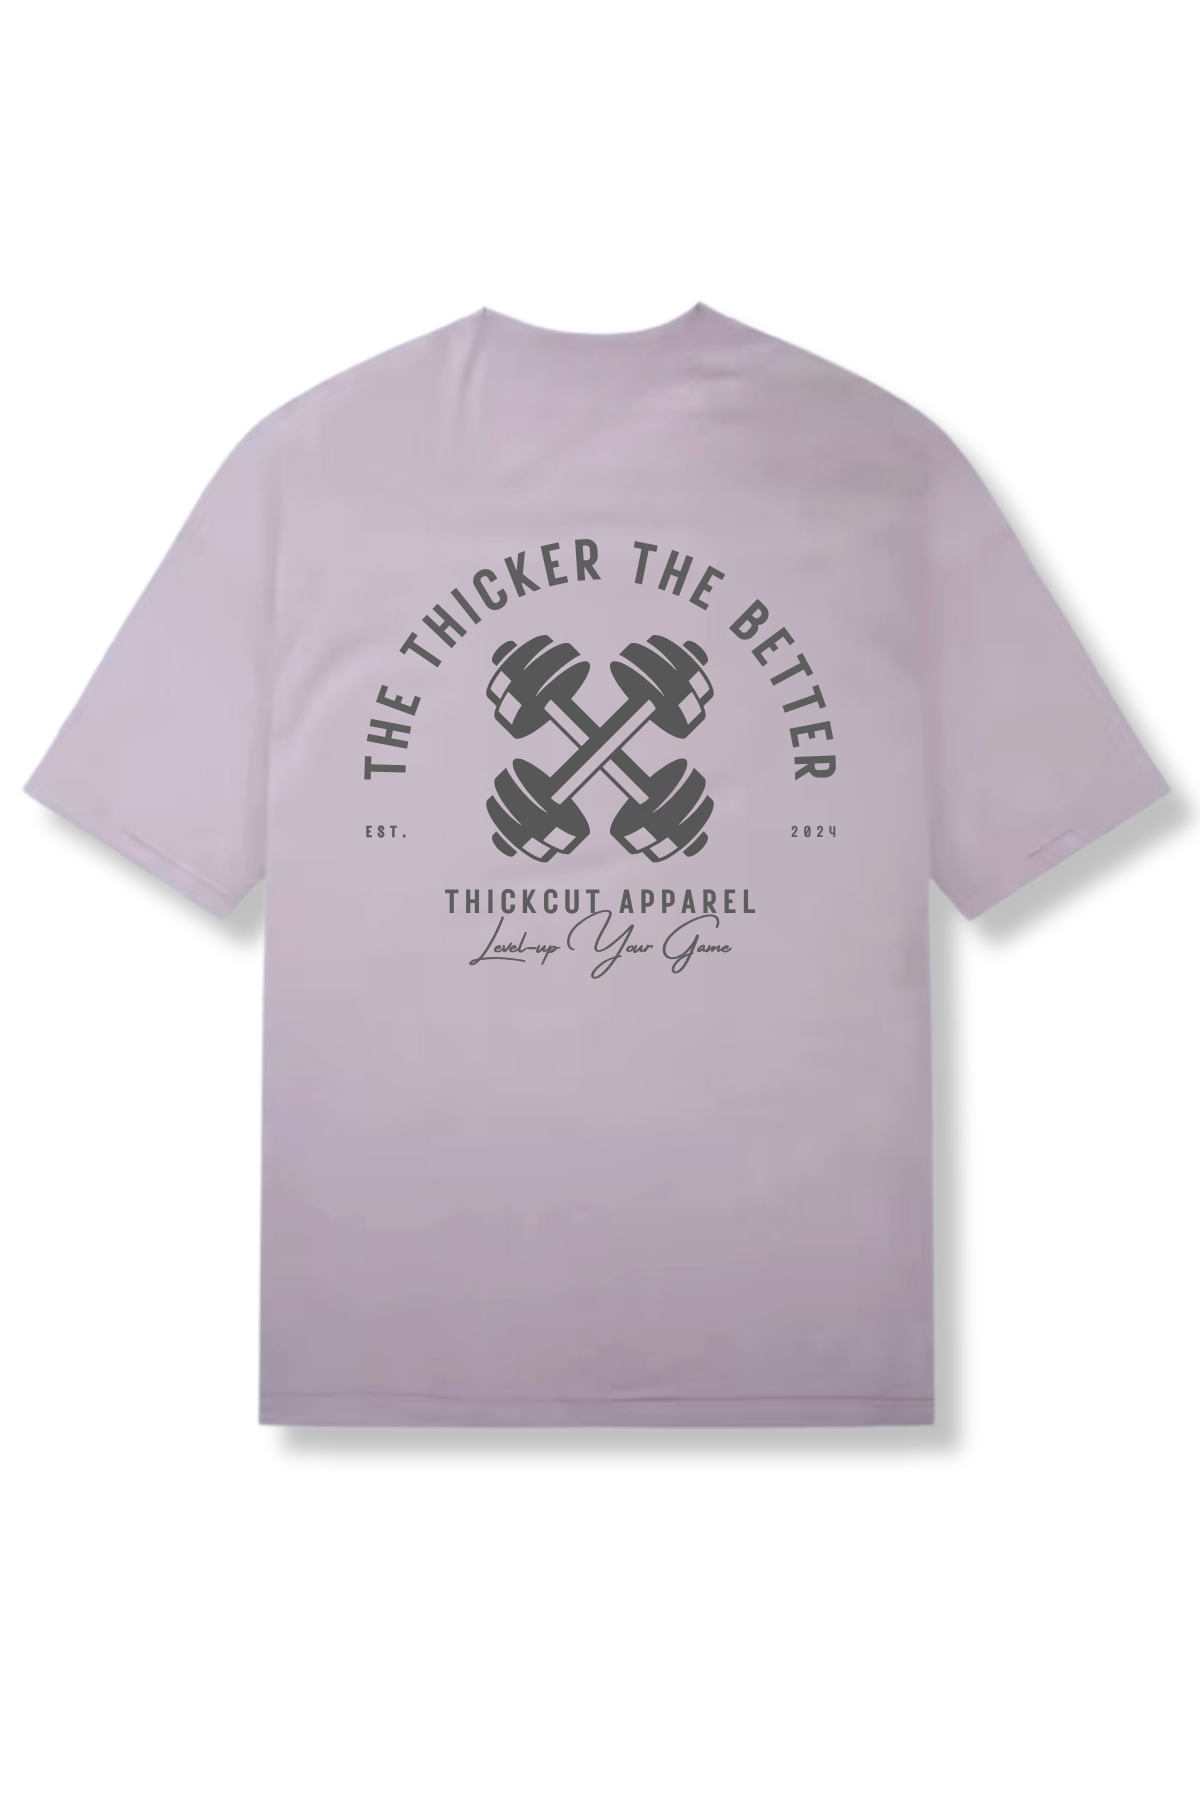 THE THICKER THE BETTER  Performance Shirt (Lavender)